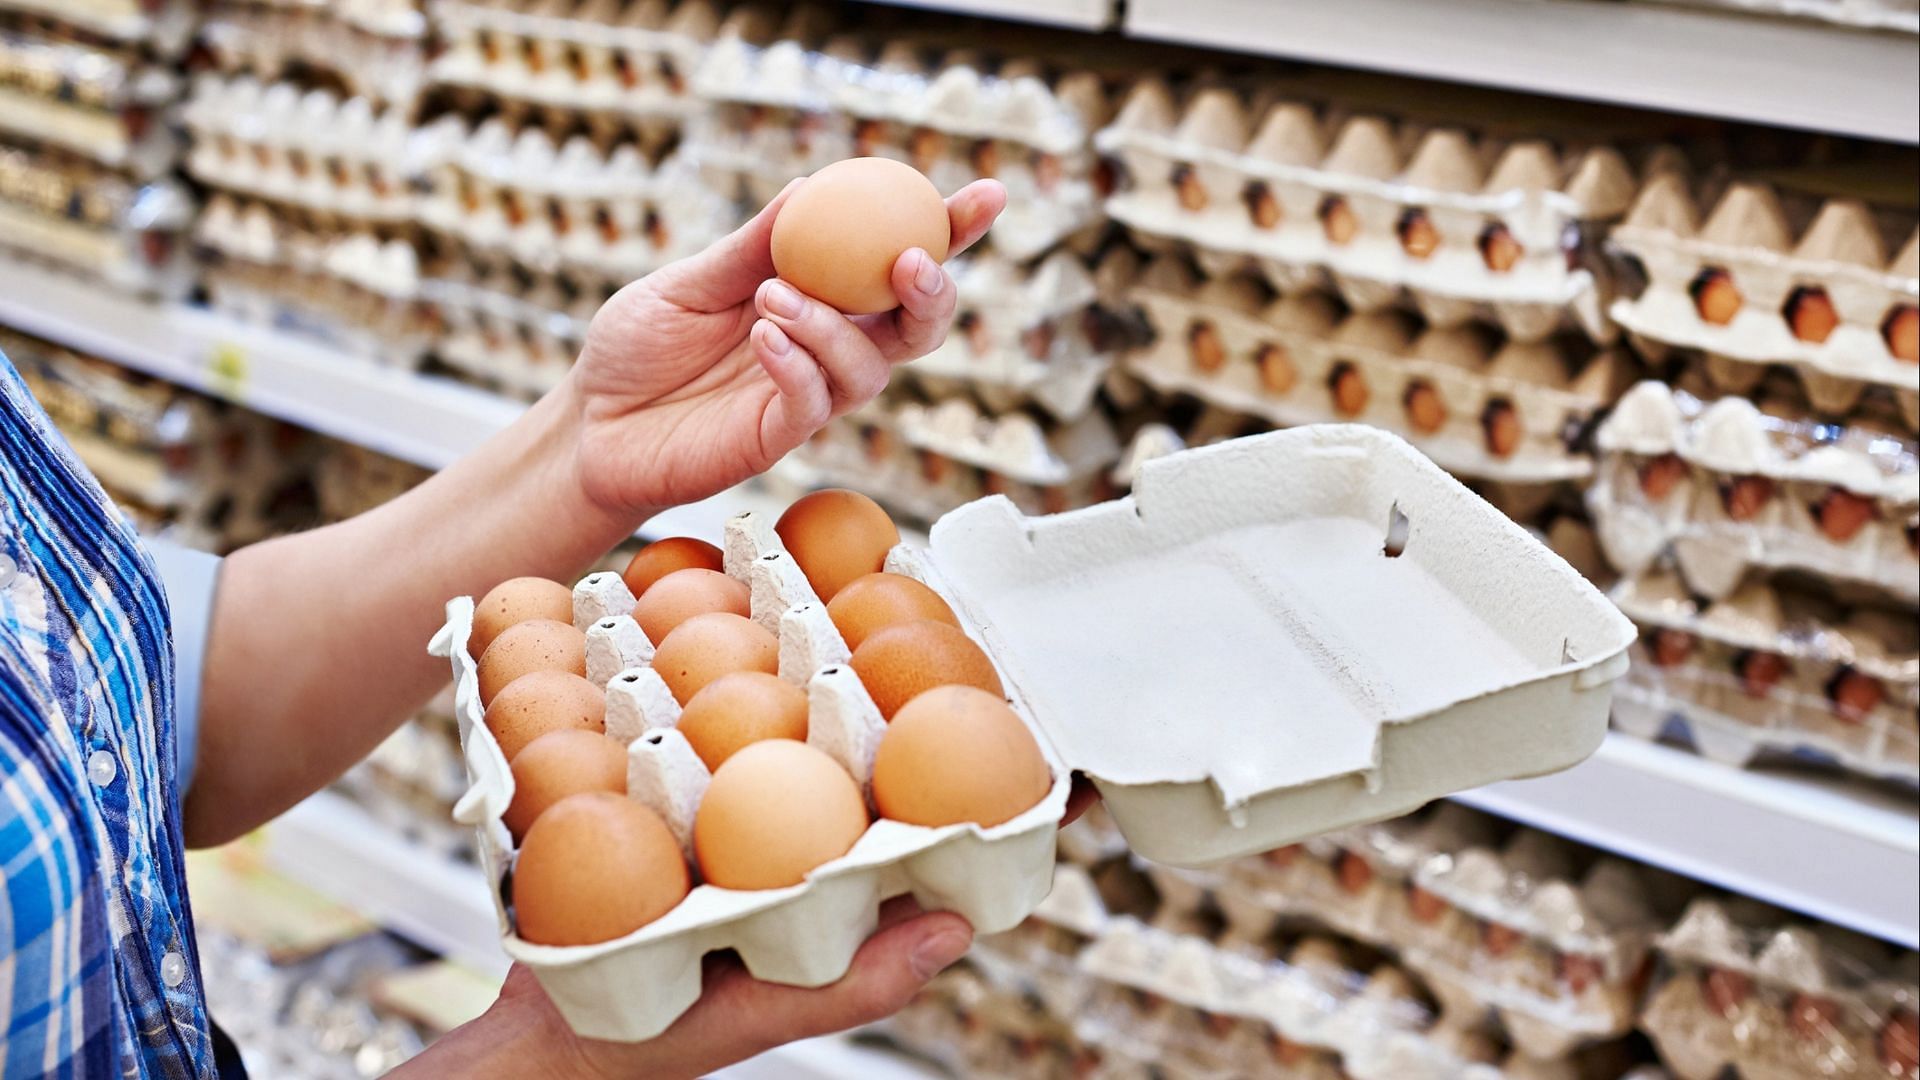 Egg prices have seen a hike of over 60% since the last fall (Image via Sergeyryzhov/Getty Images)